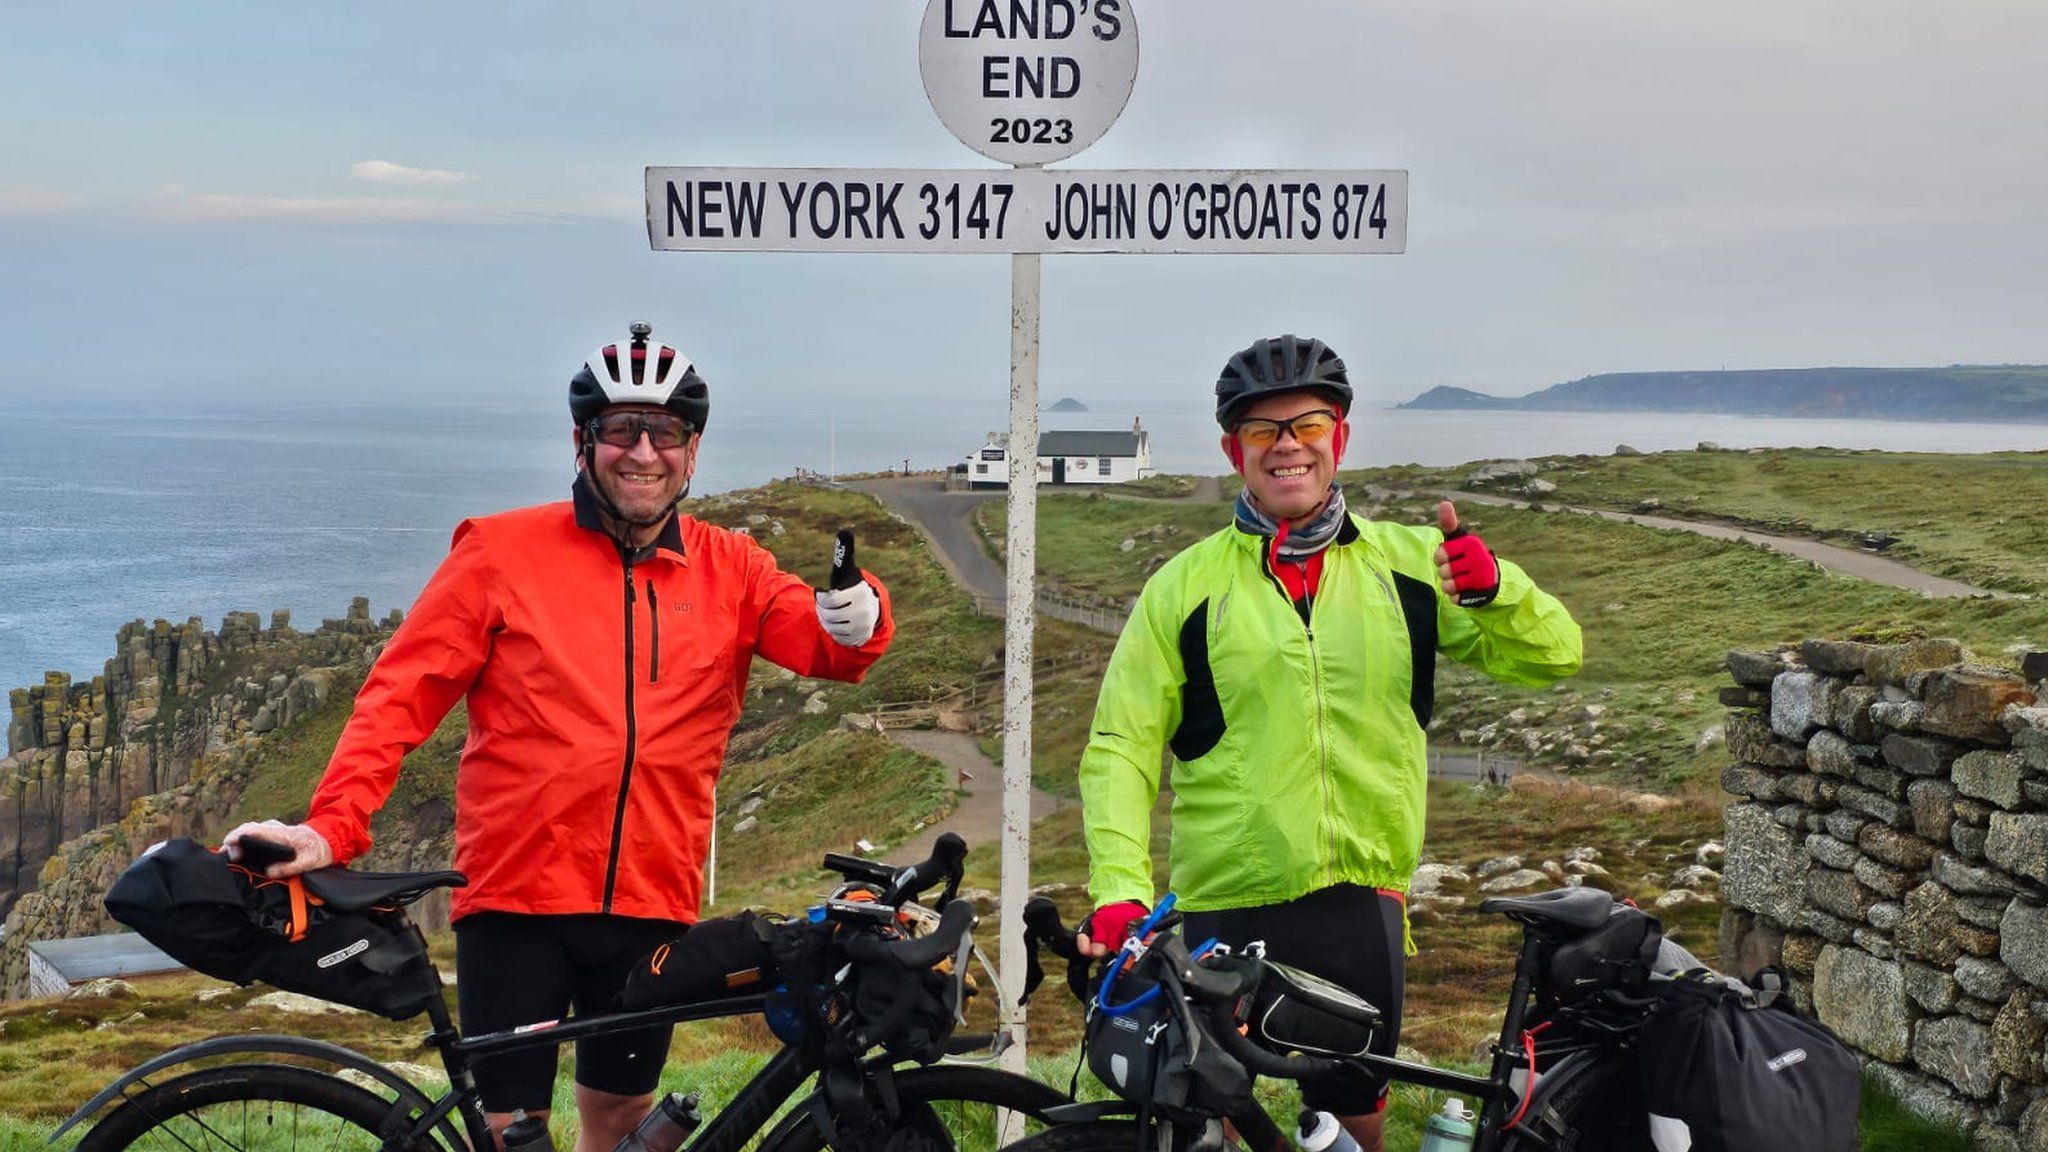 Mark and Ian standing with their bikes in front of the landmark sign at Land's End, Cornwall.